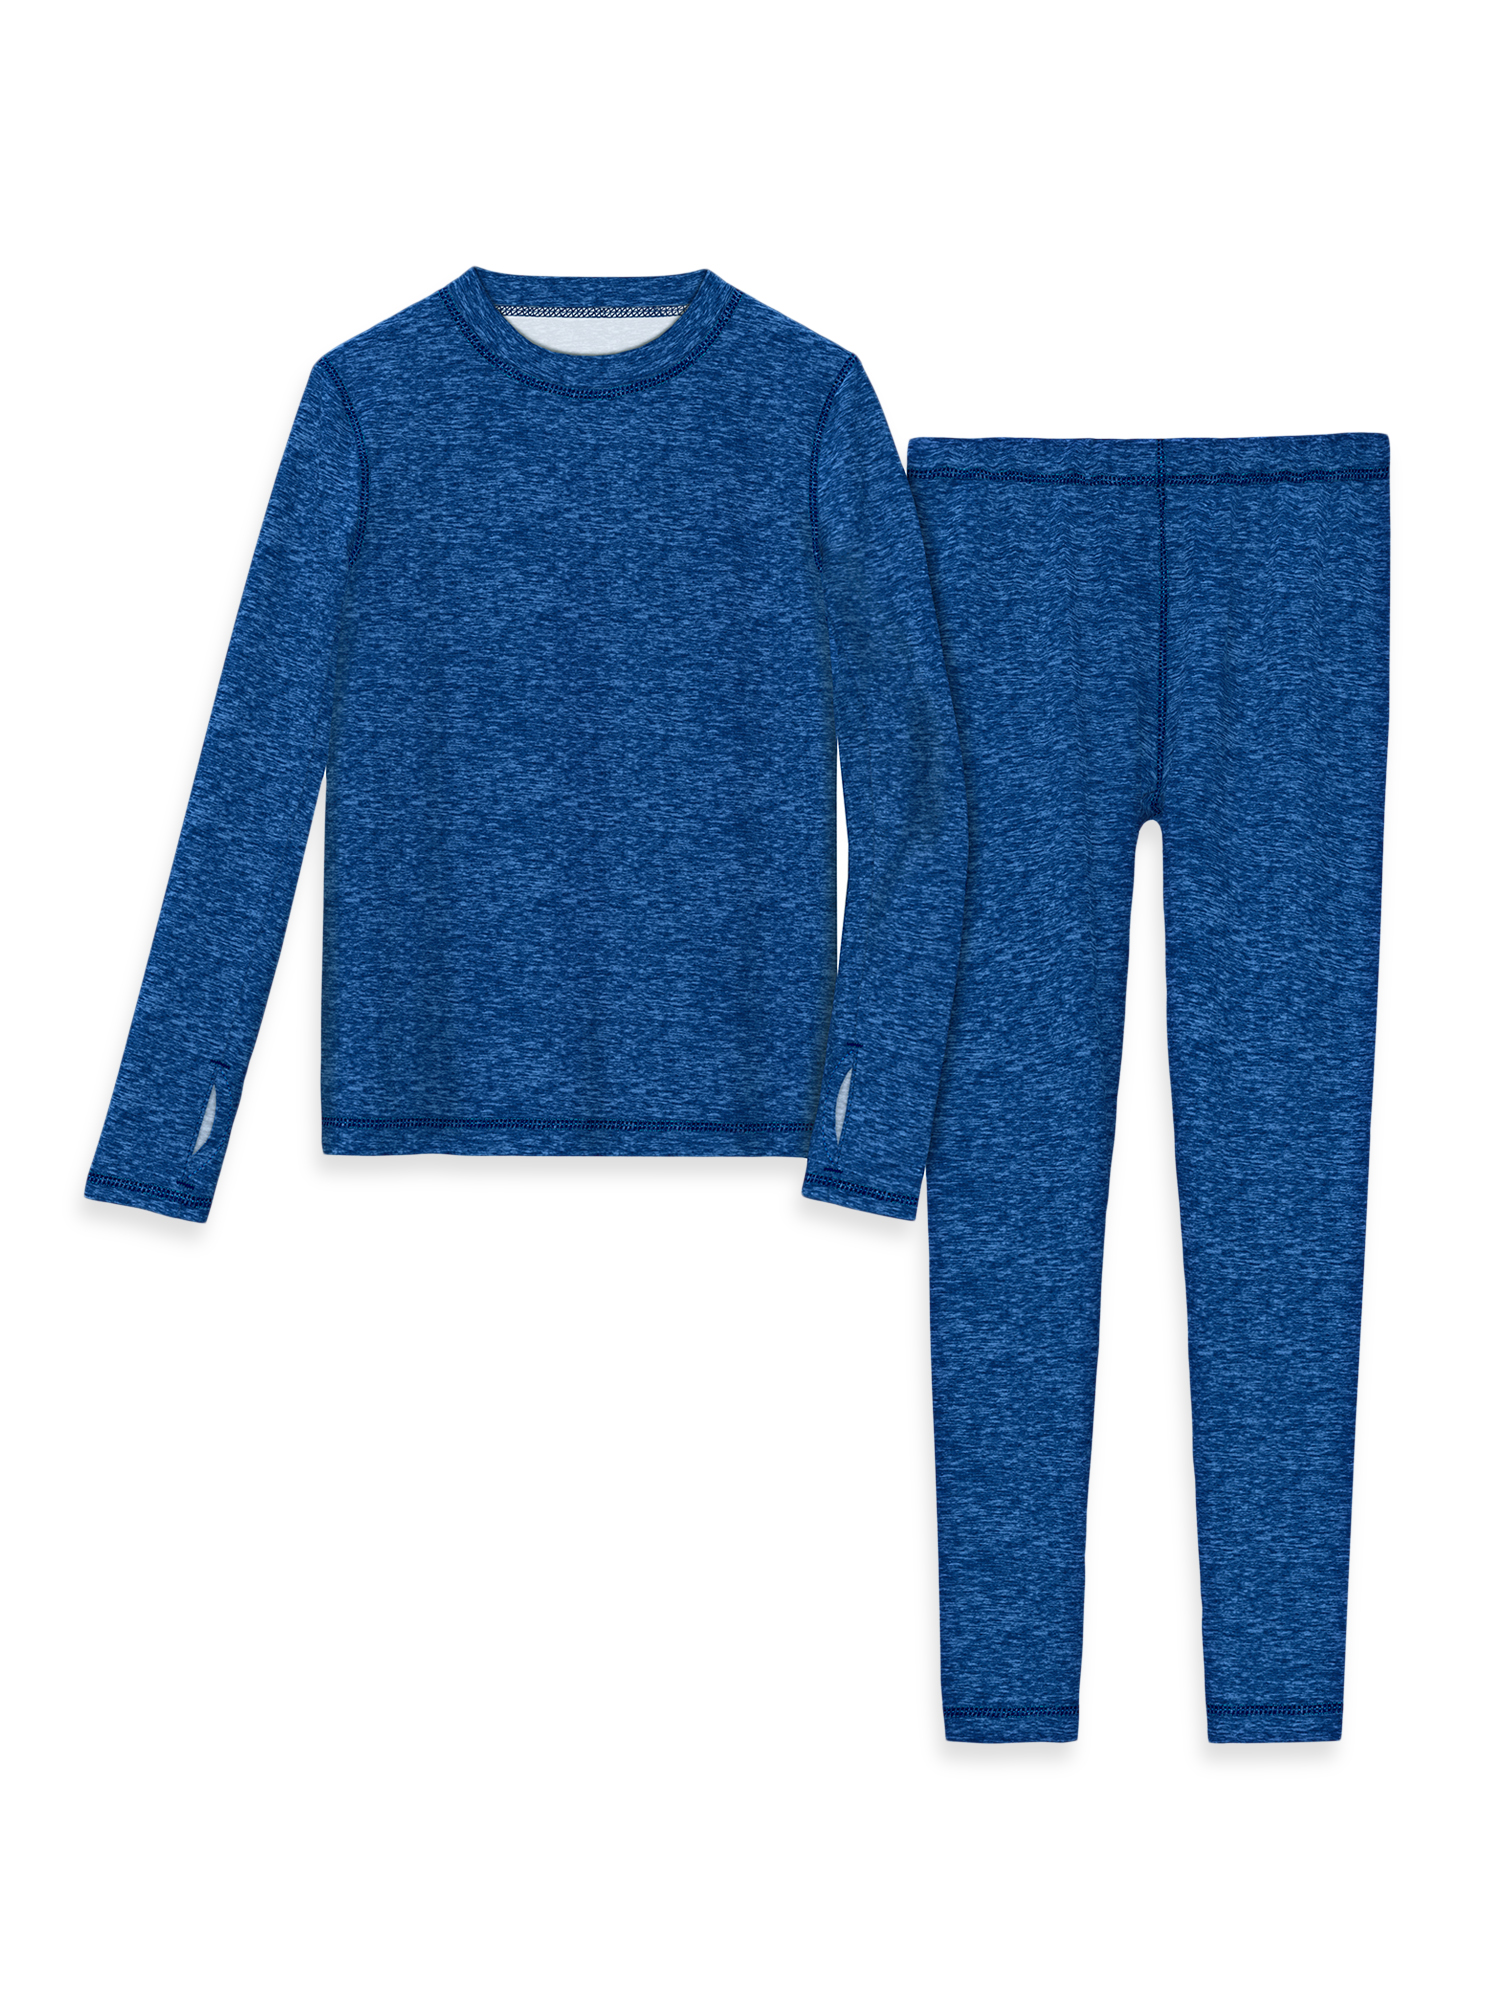 Athletic Works Boys Thermal Top & Bottom Set, Sizes XS-2XL - image 1 of 1